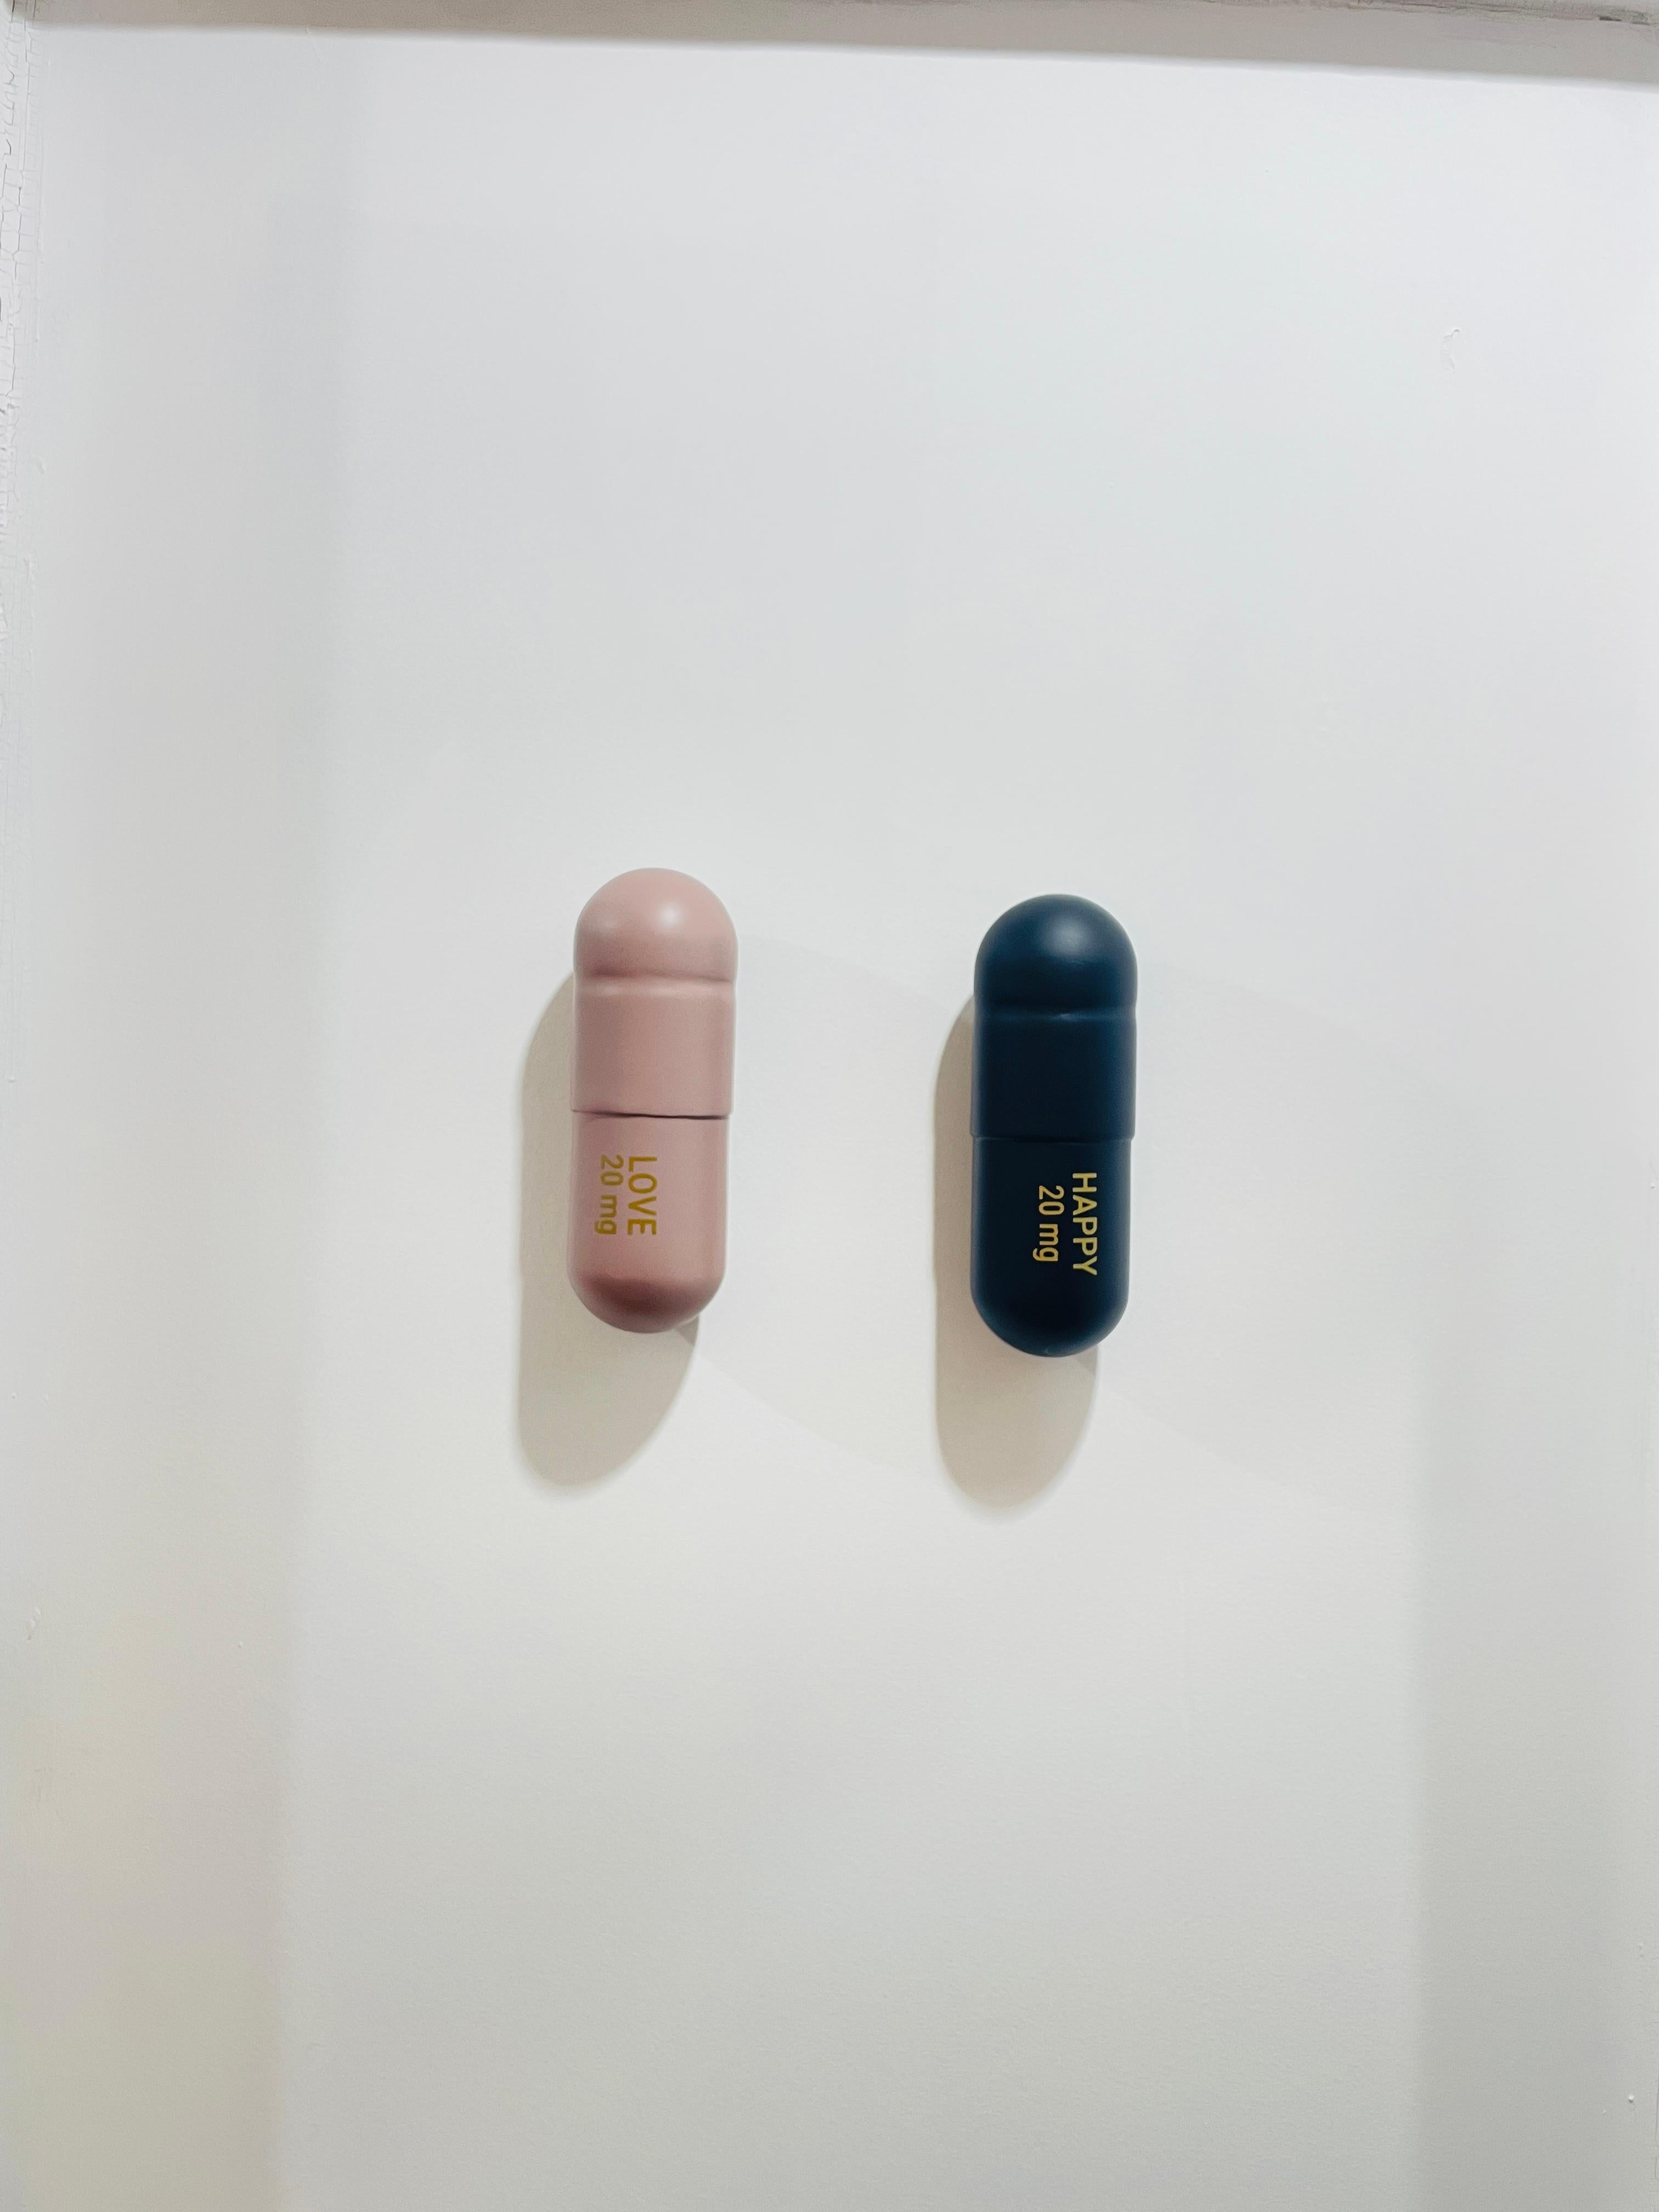 pink pill with 99 on it